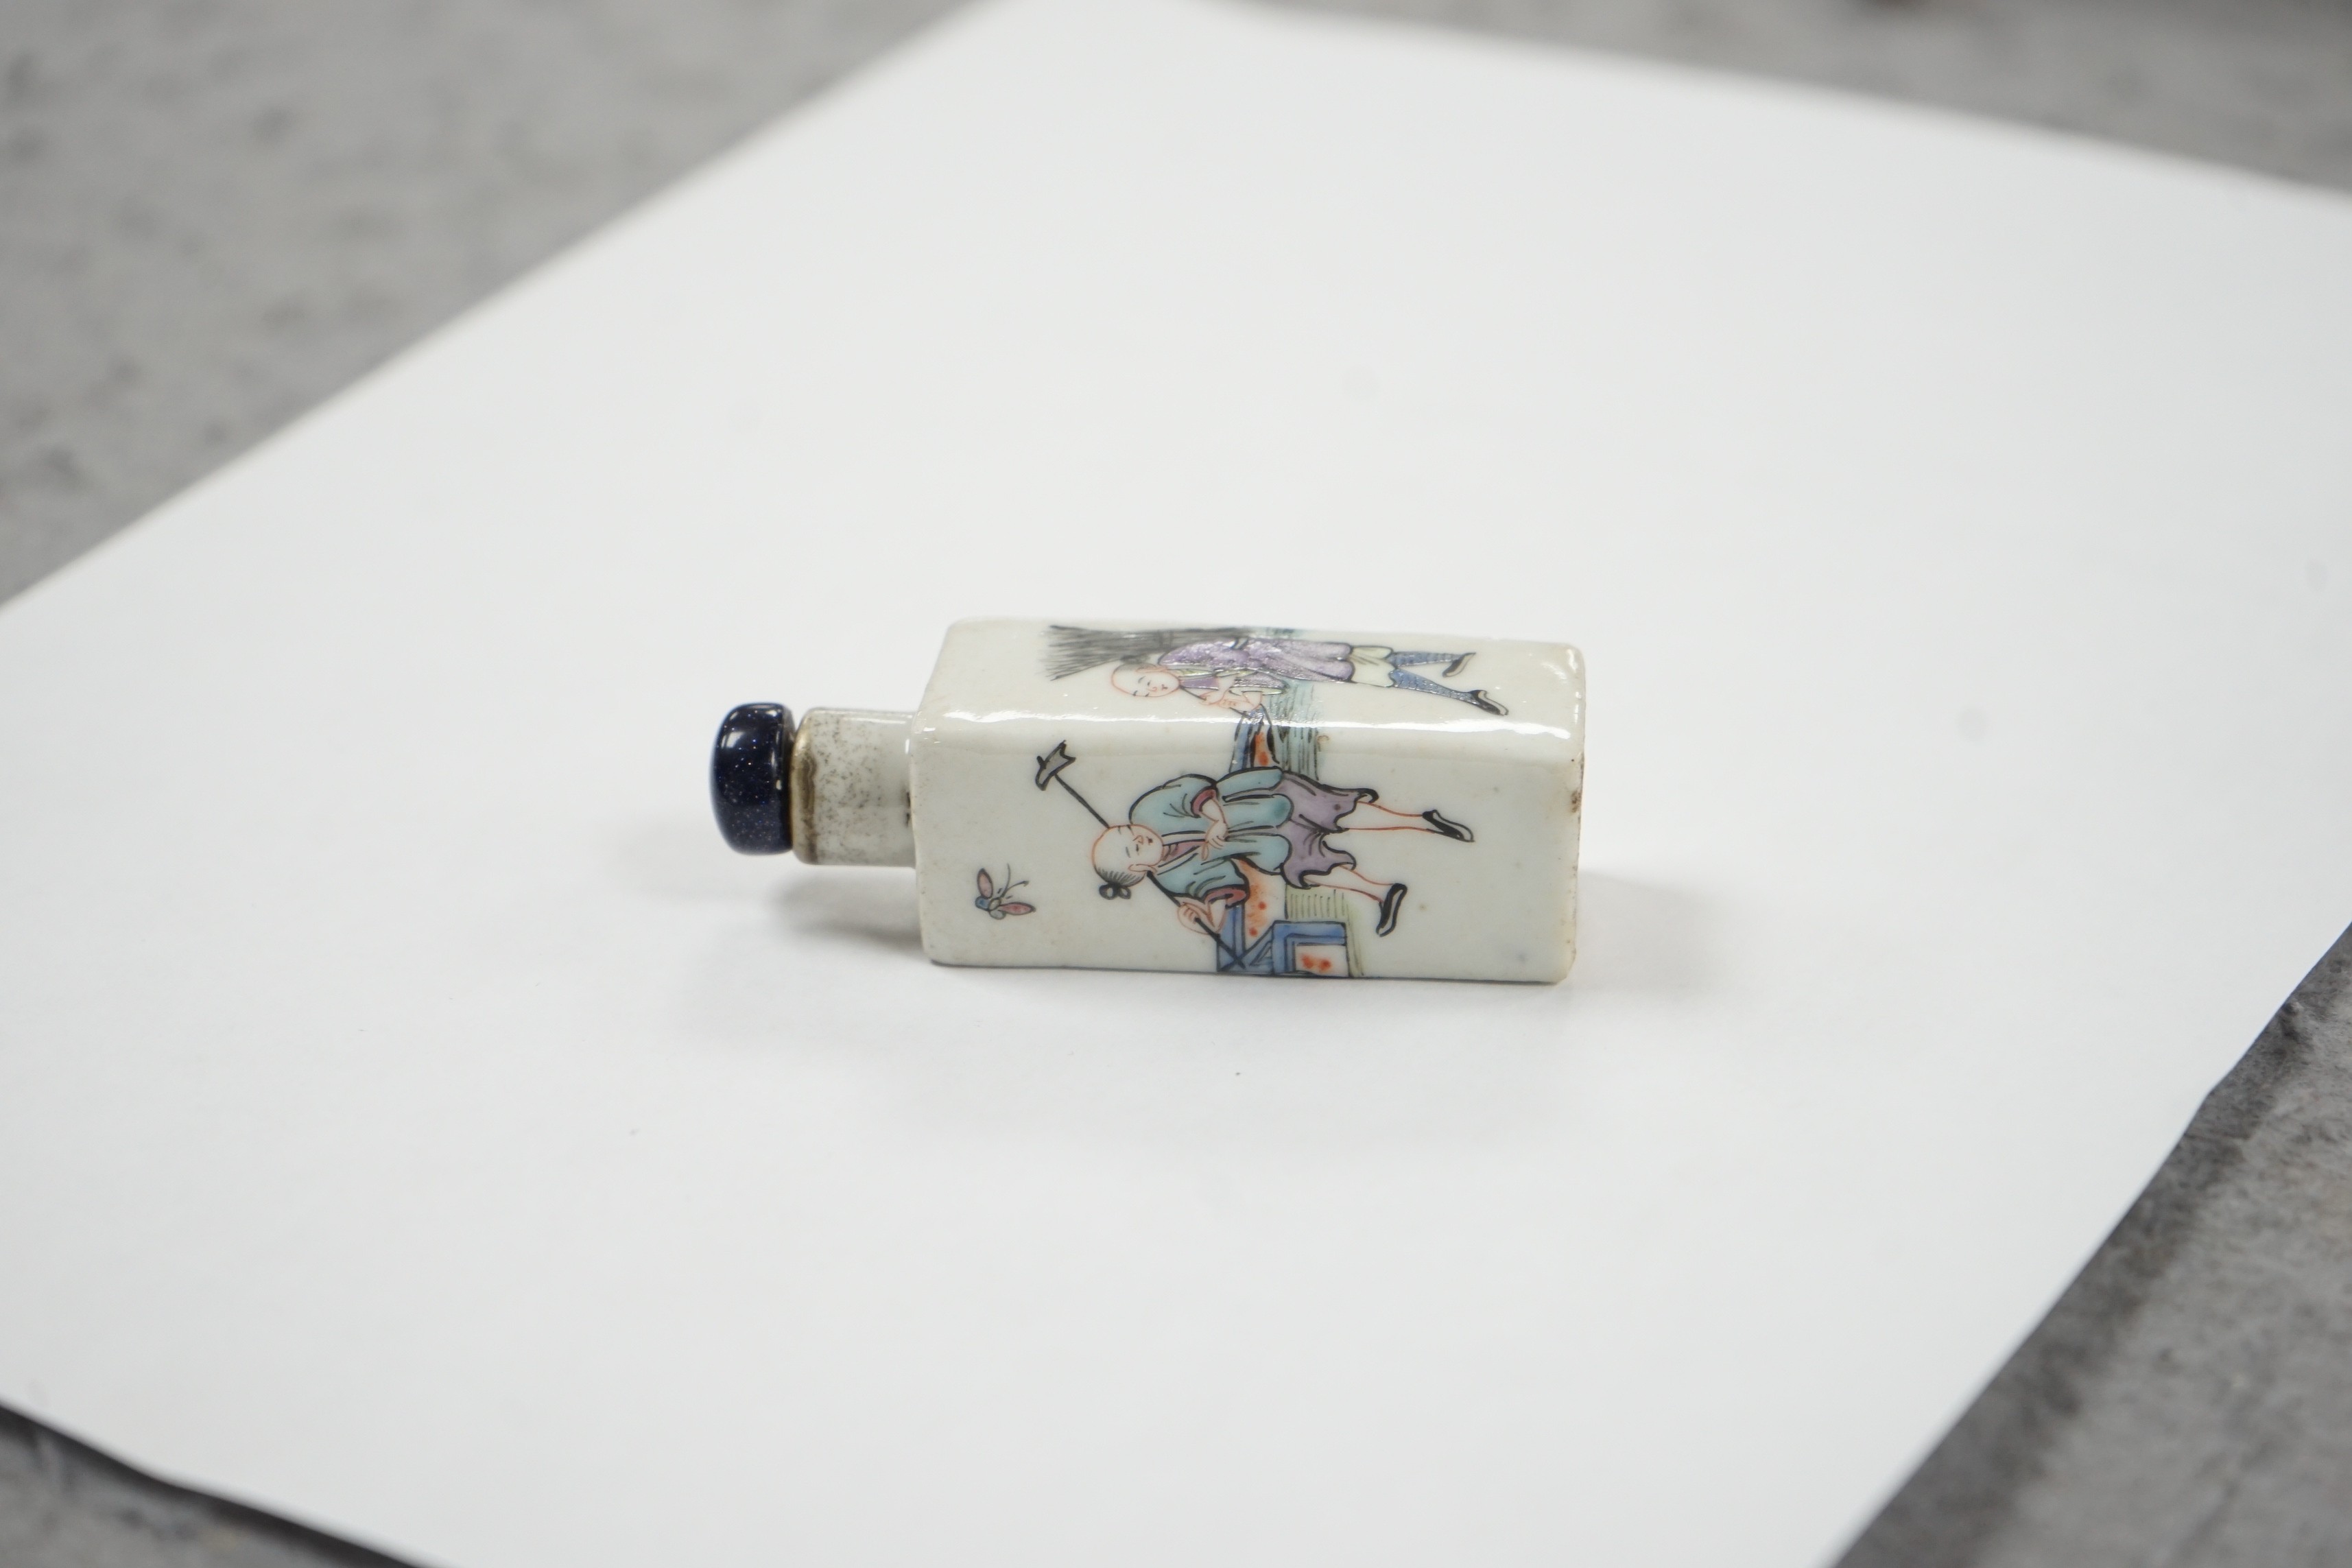 A Chinese square famille rose snuff bottle, Tongzhi mark, late 19th century, 6.4cm high